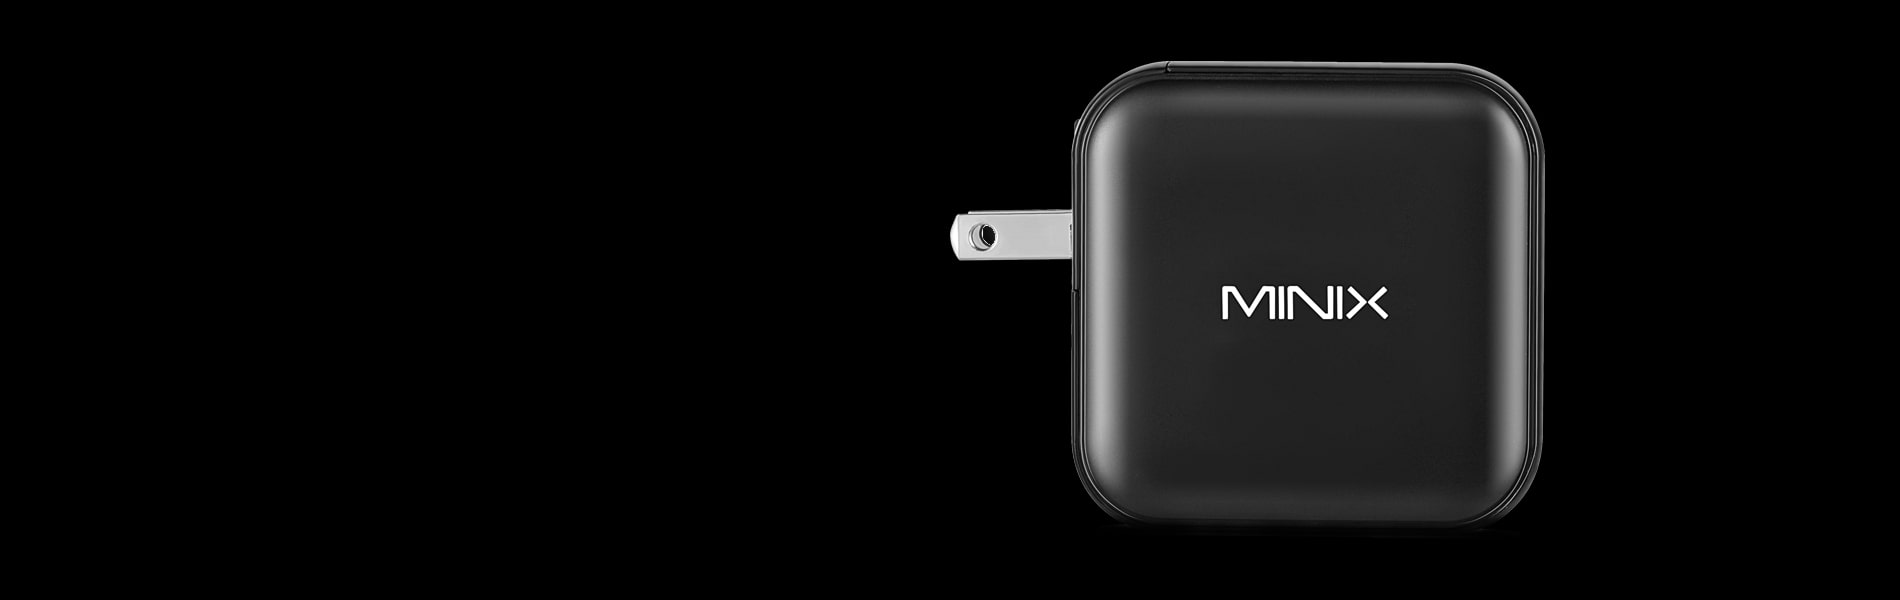 Buy Official MINIX Neo P-3 Wall Charger in Pakistan